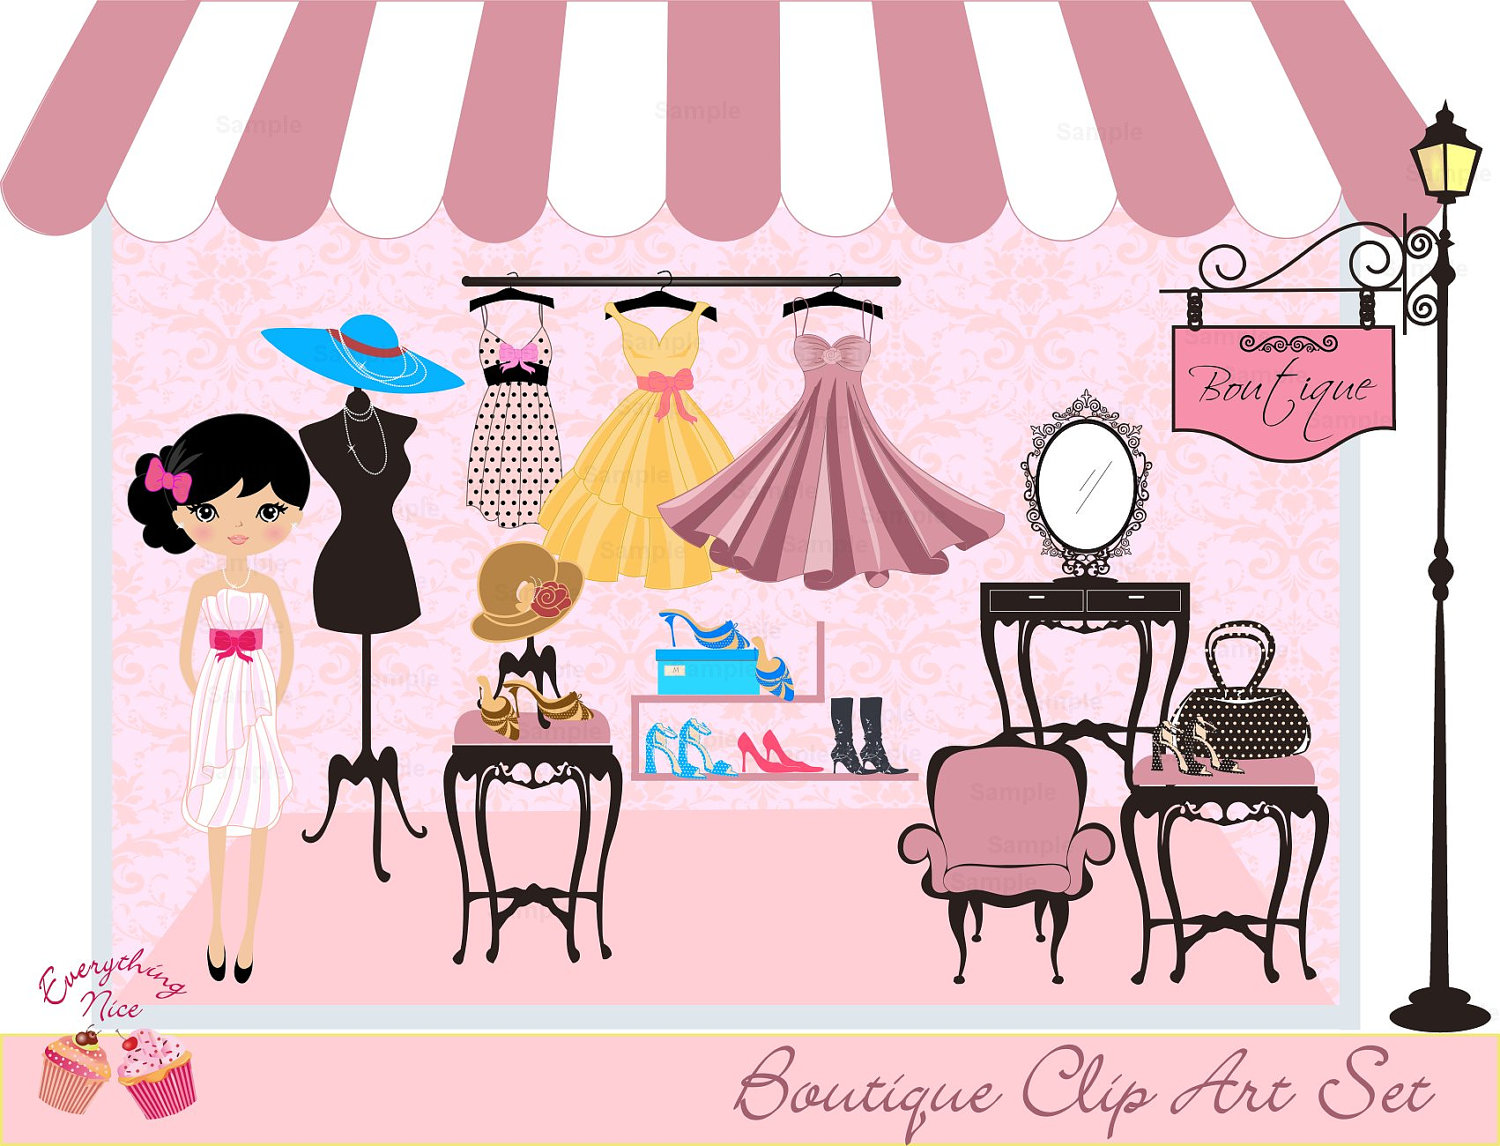 Boutique Clip Art Set By 1everythingnice On Etsy